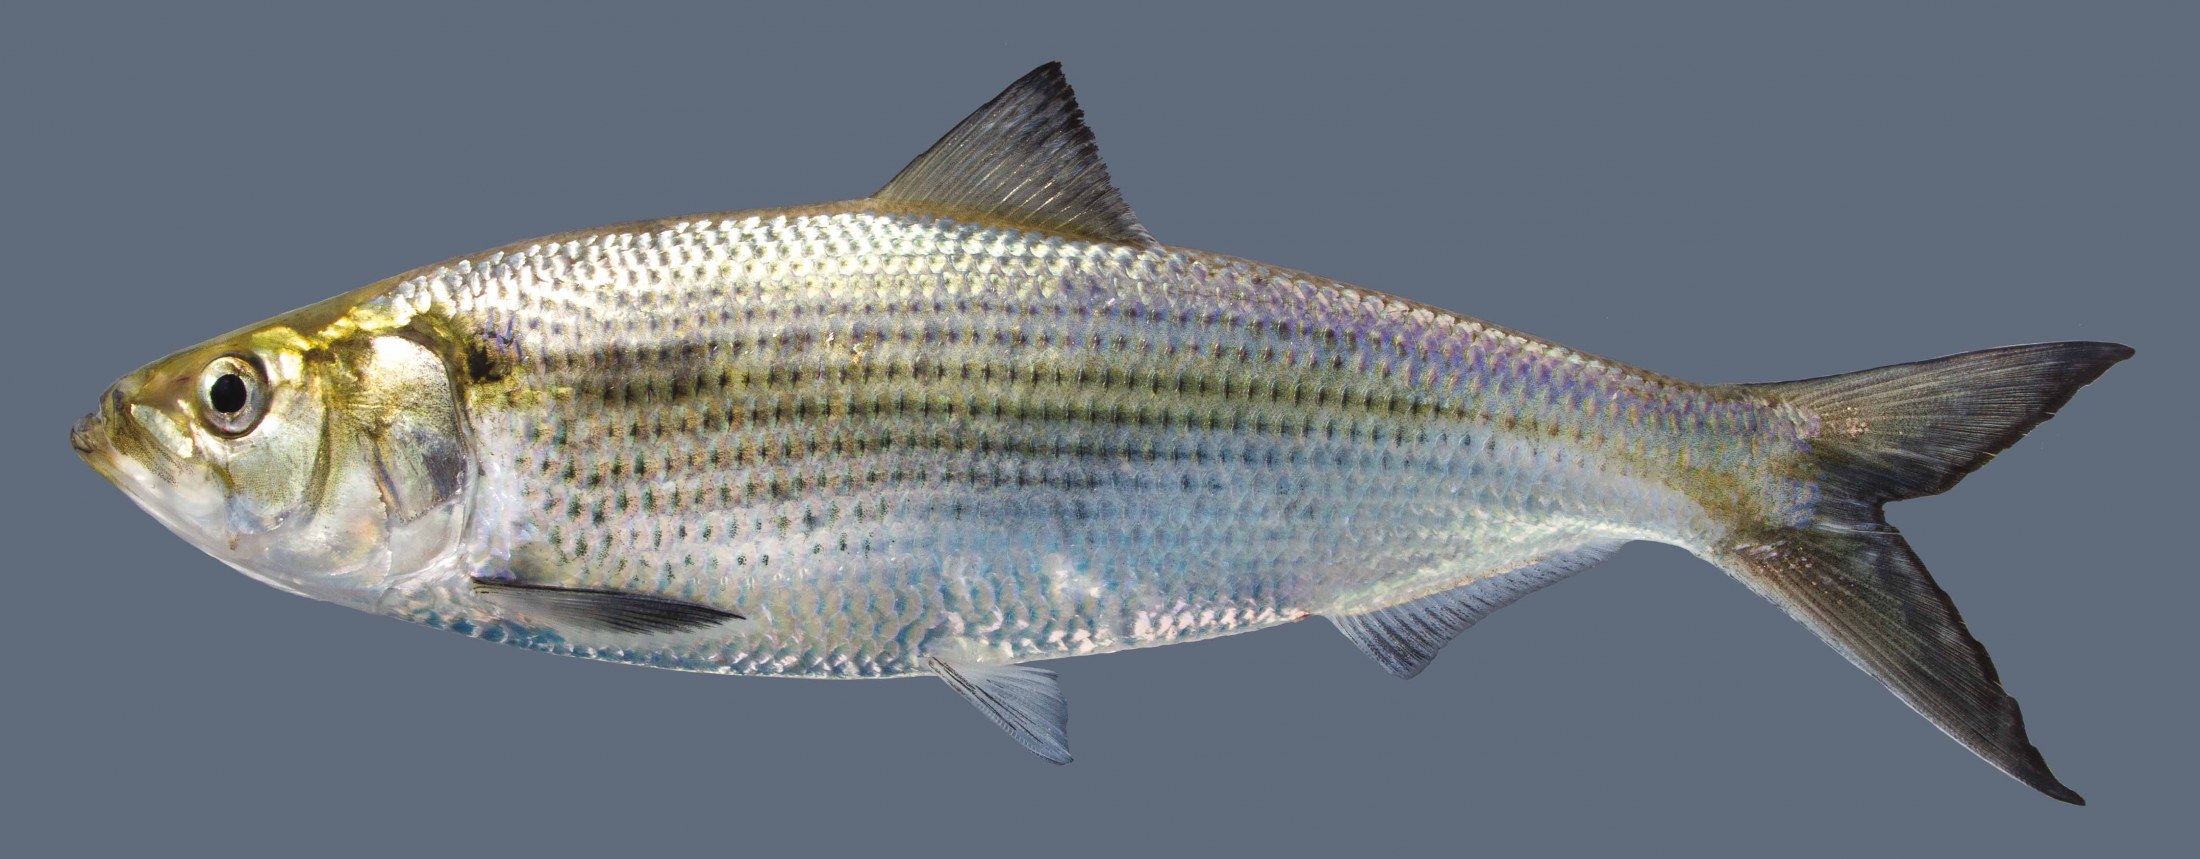 Lateral view of a hickory shad